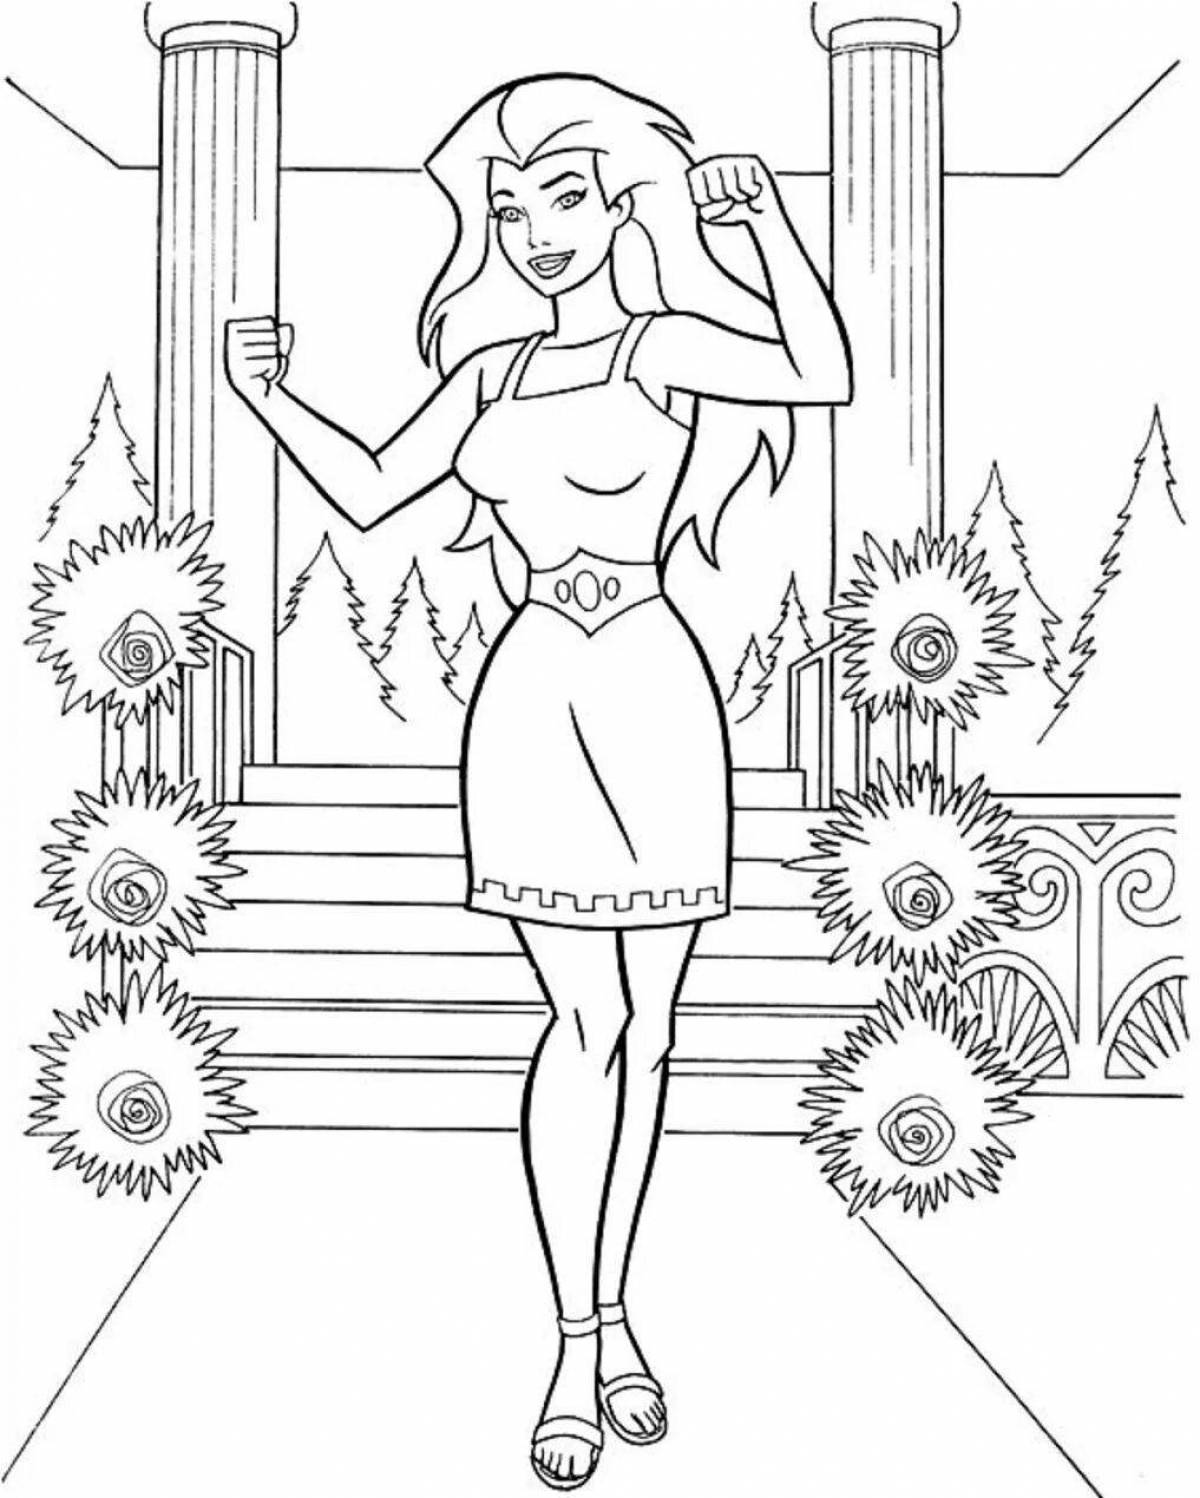 Fun coloring page family leggy